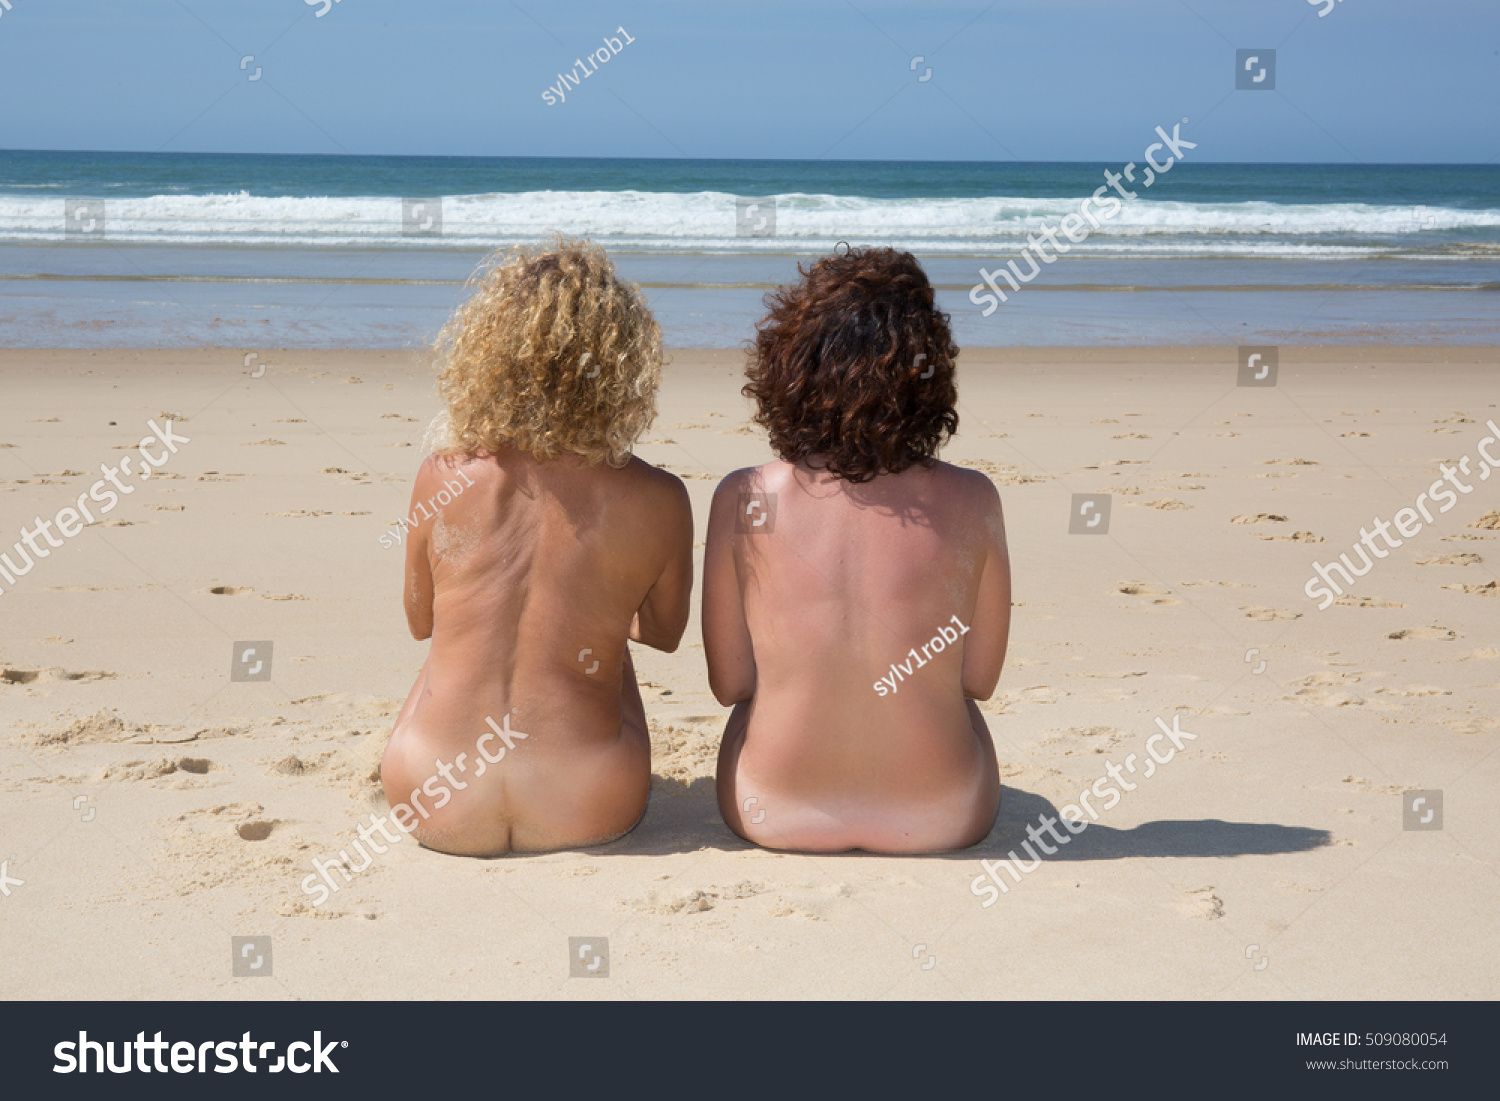 Two alluring women are relaxing on the nudist beach